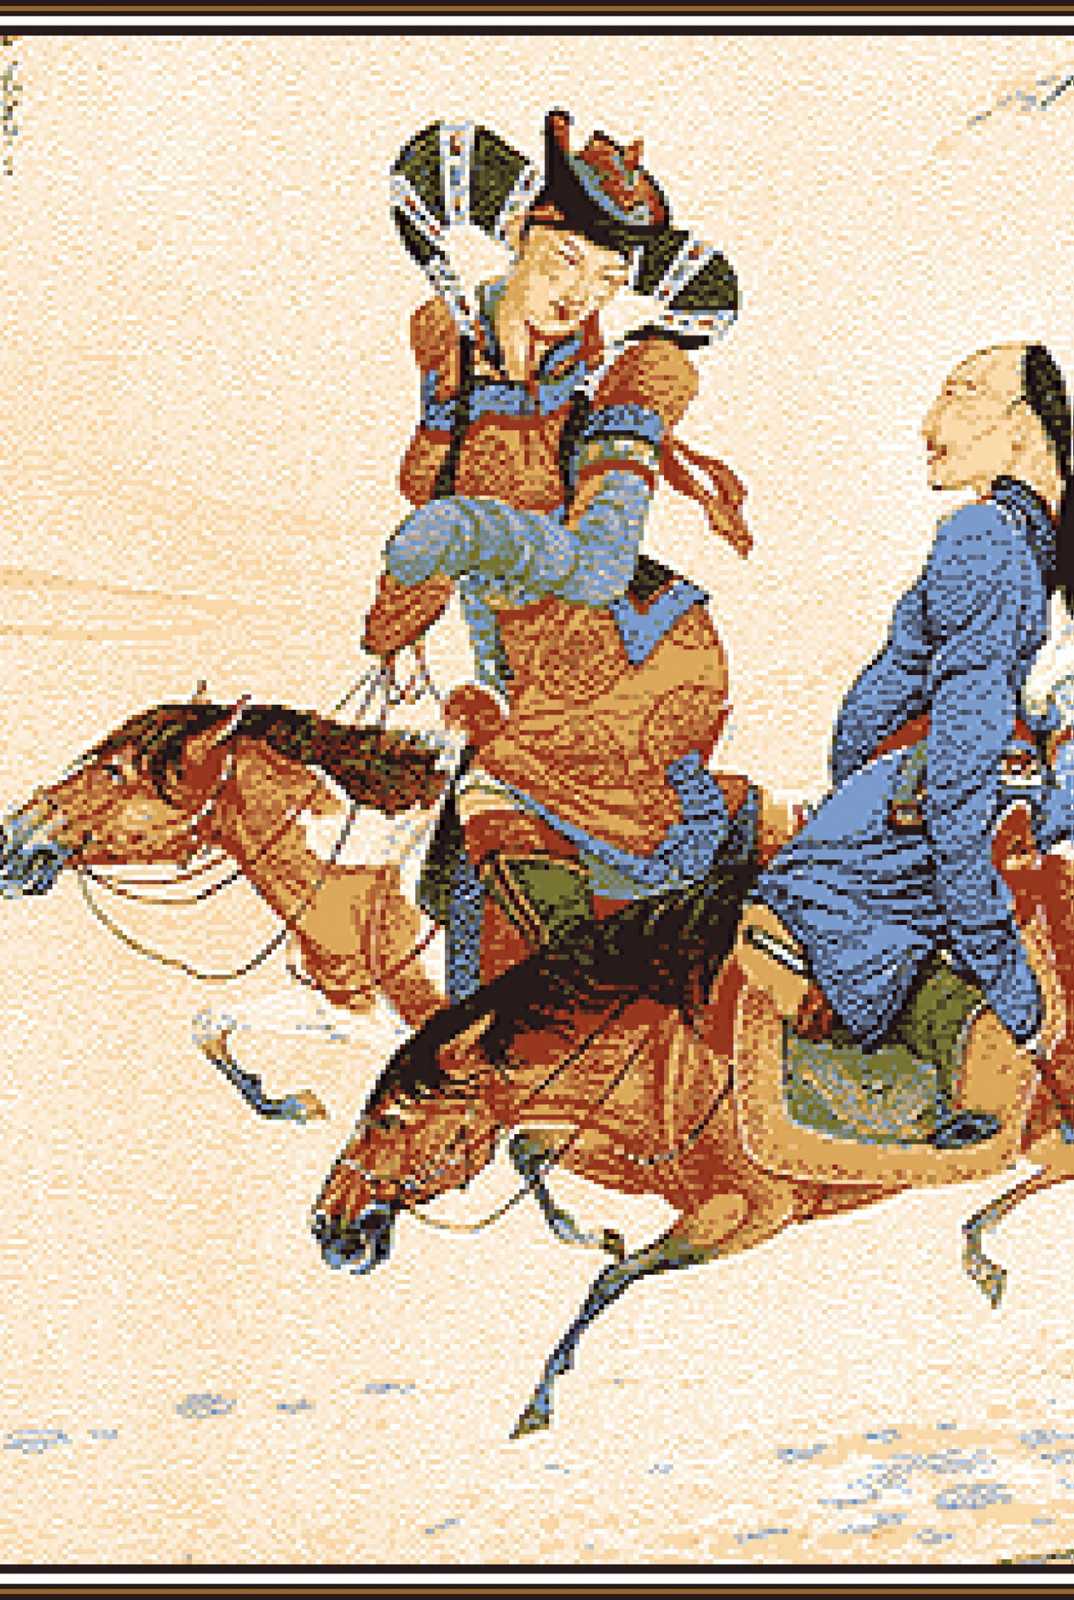 Traditional East Asian artwork of two people riding horses, dressed in detailed historical attire, showcasing cultural heritage and artistry